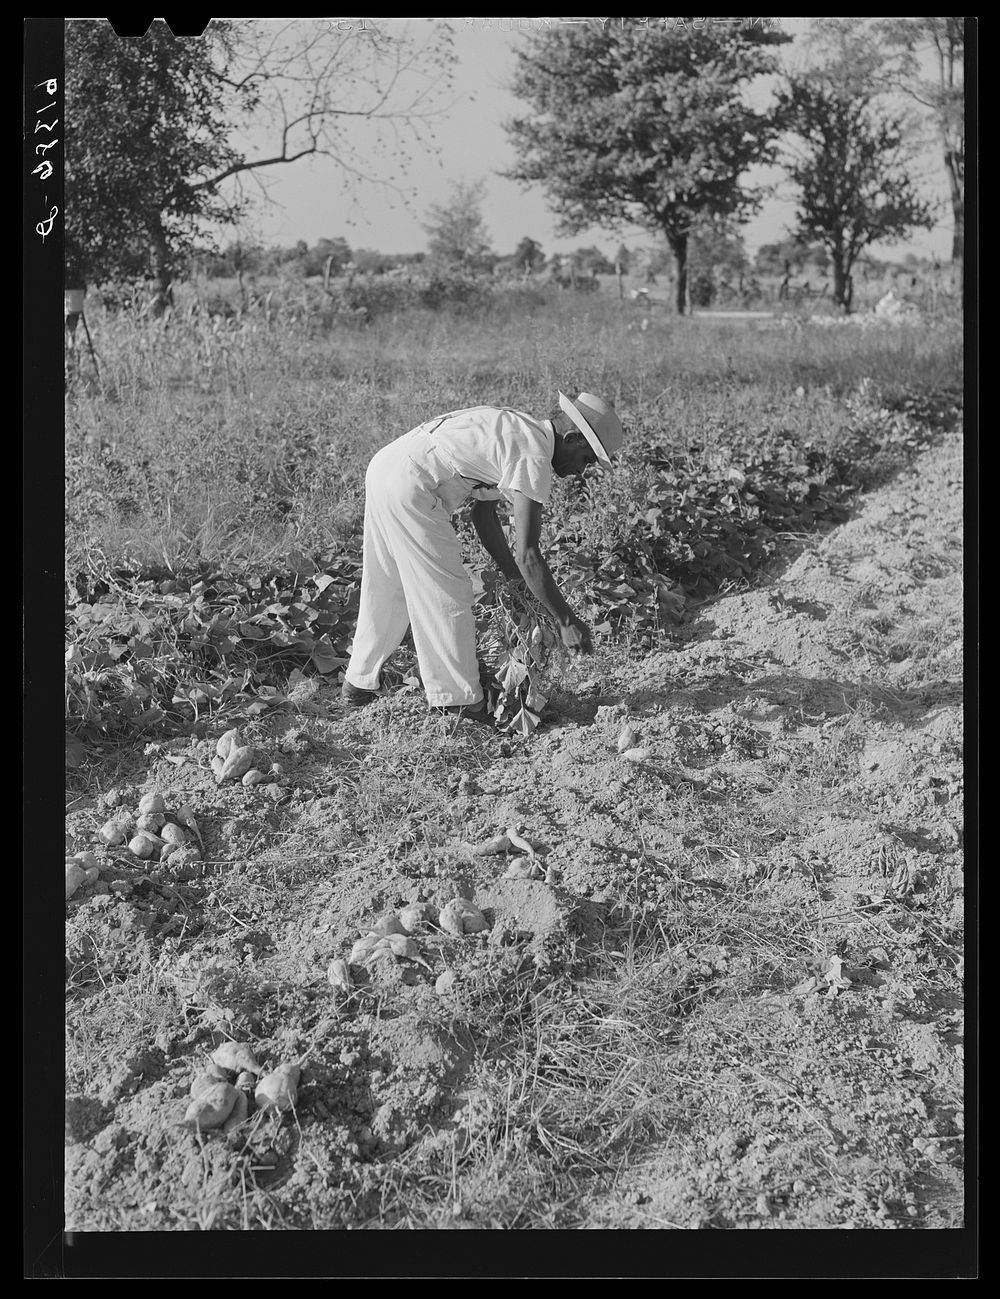 [Untitled photo, possibly related to: Eugene Smith, FSA (Farm Security Administration) borrower, picking beans in the…